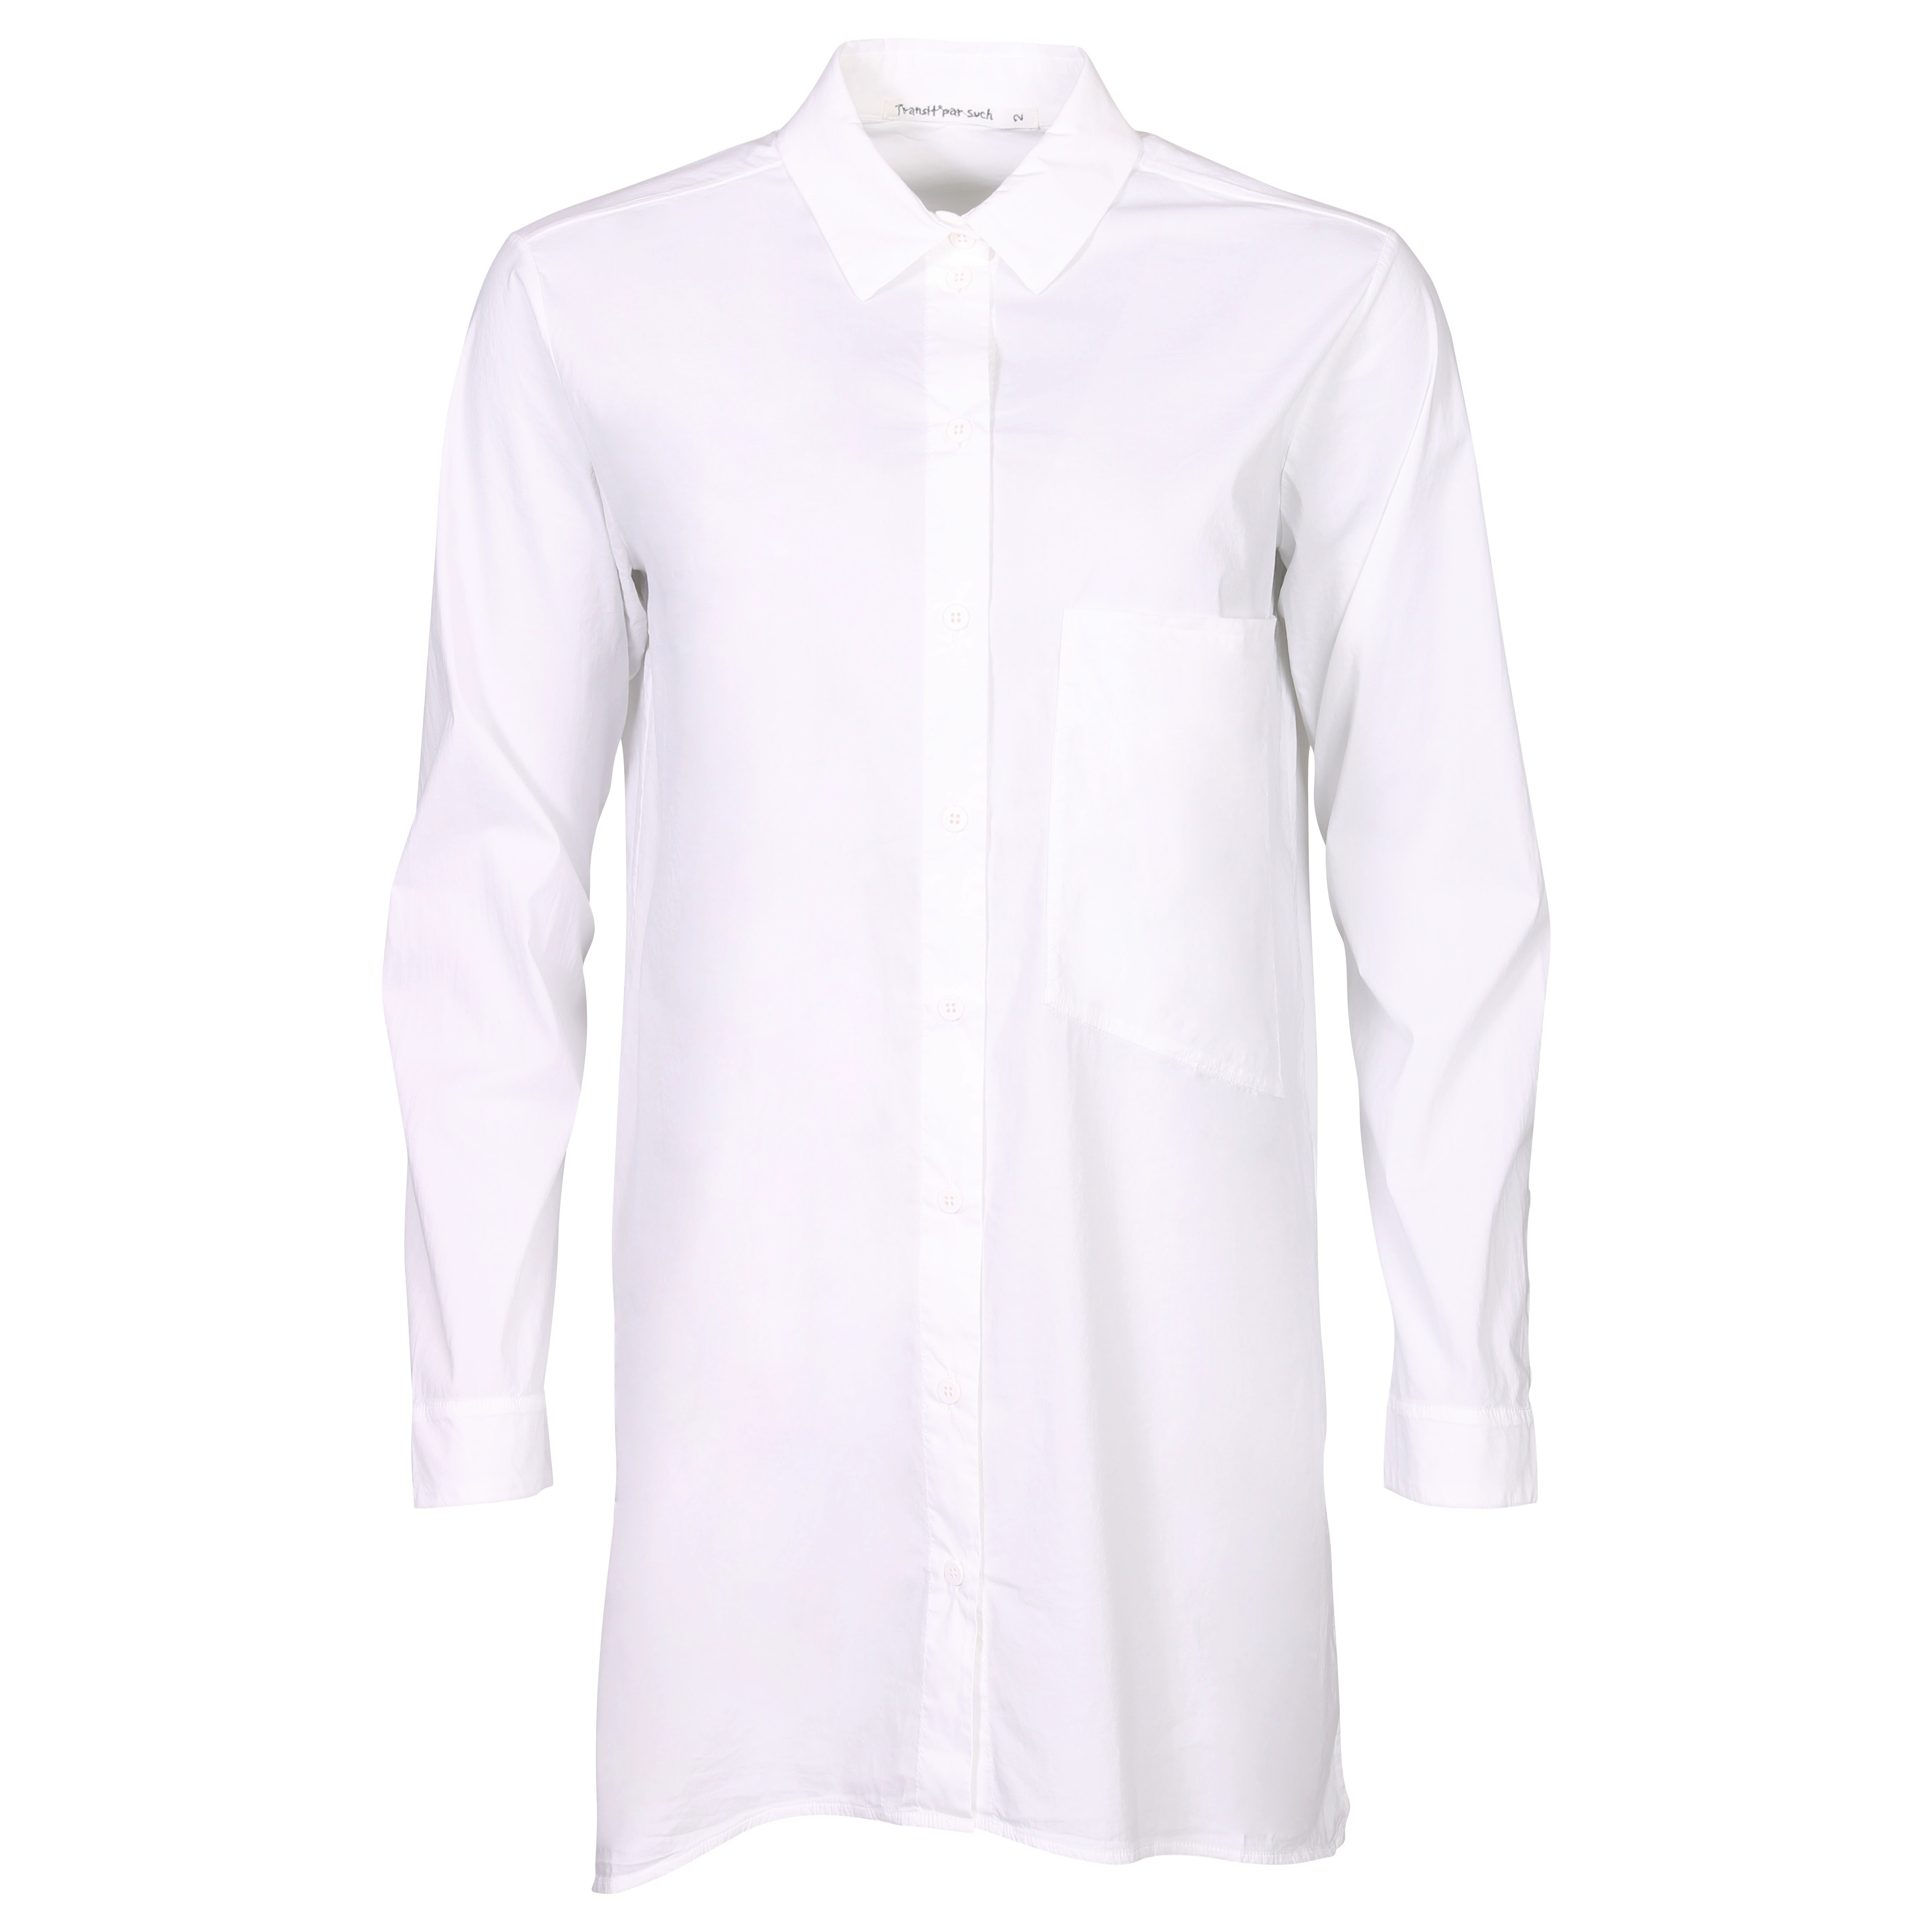 Transit Par Such Blouse in White XS